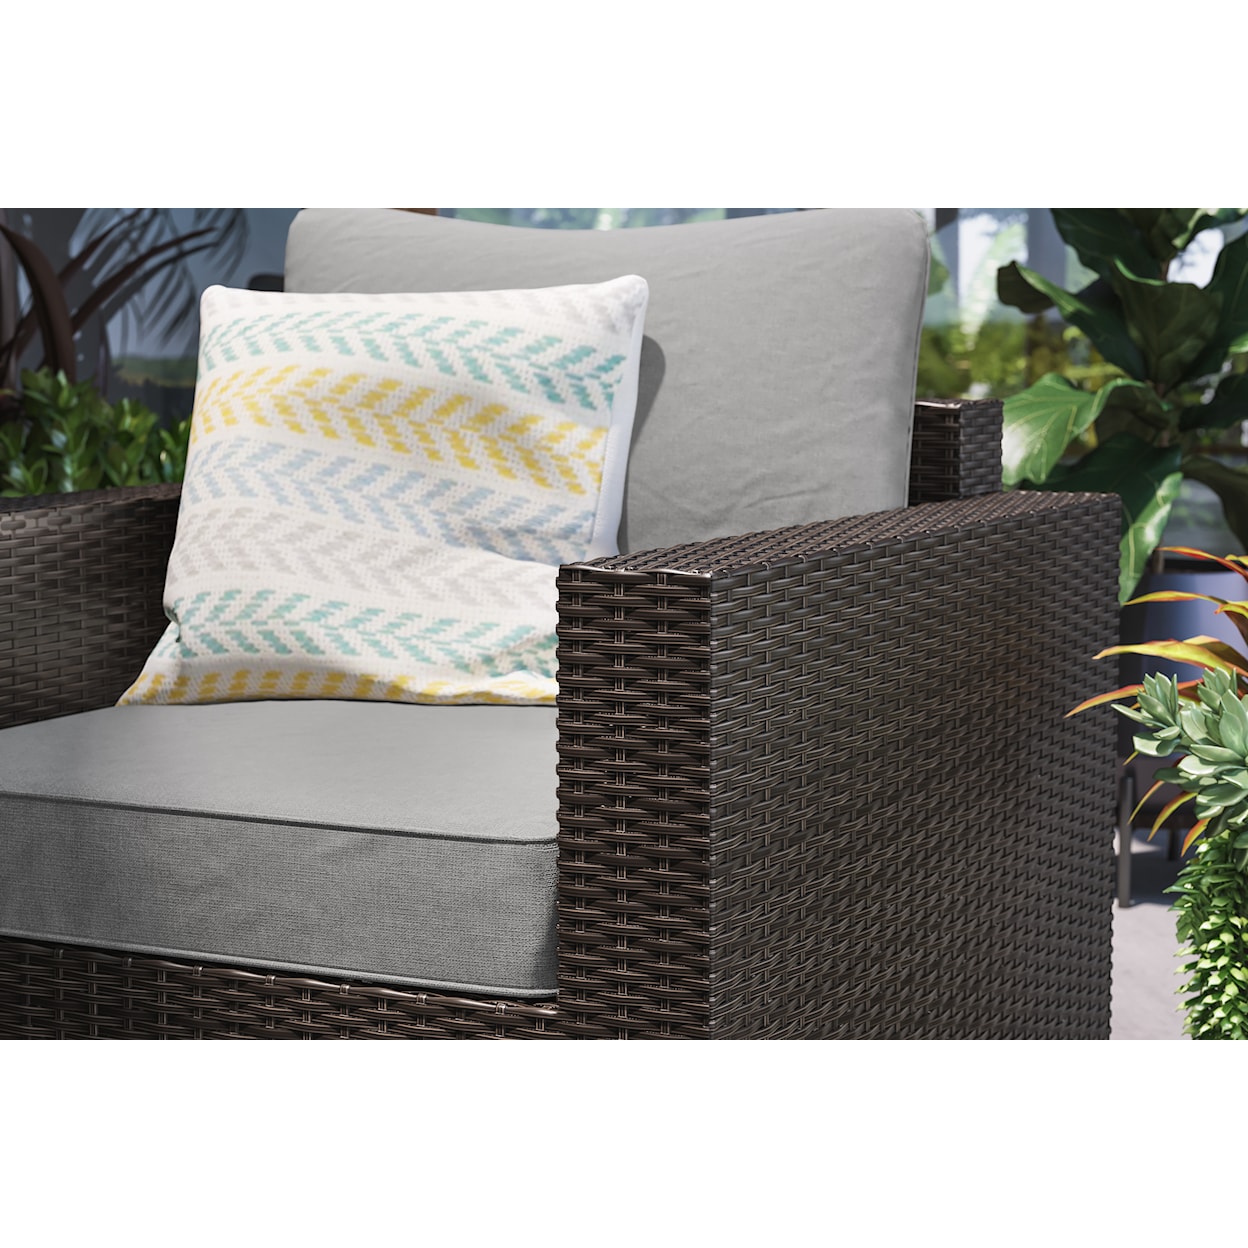 homestyles Cape Shores Chair